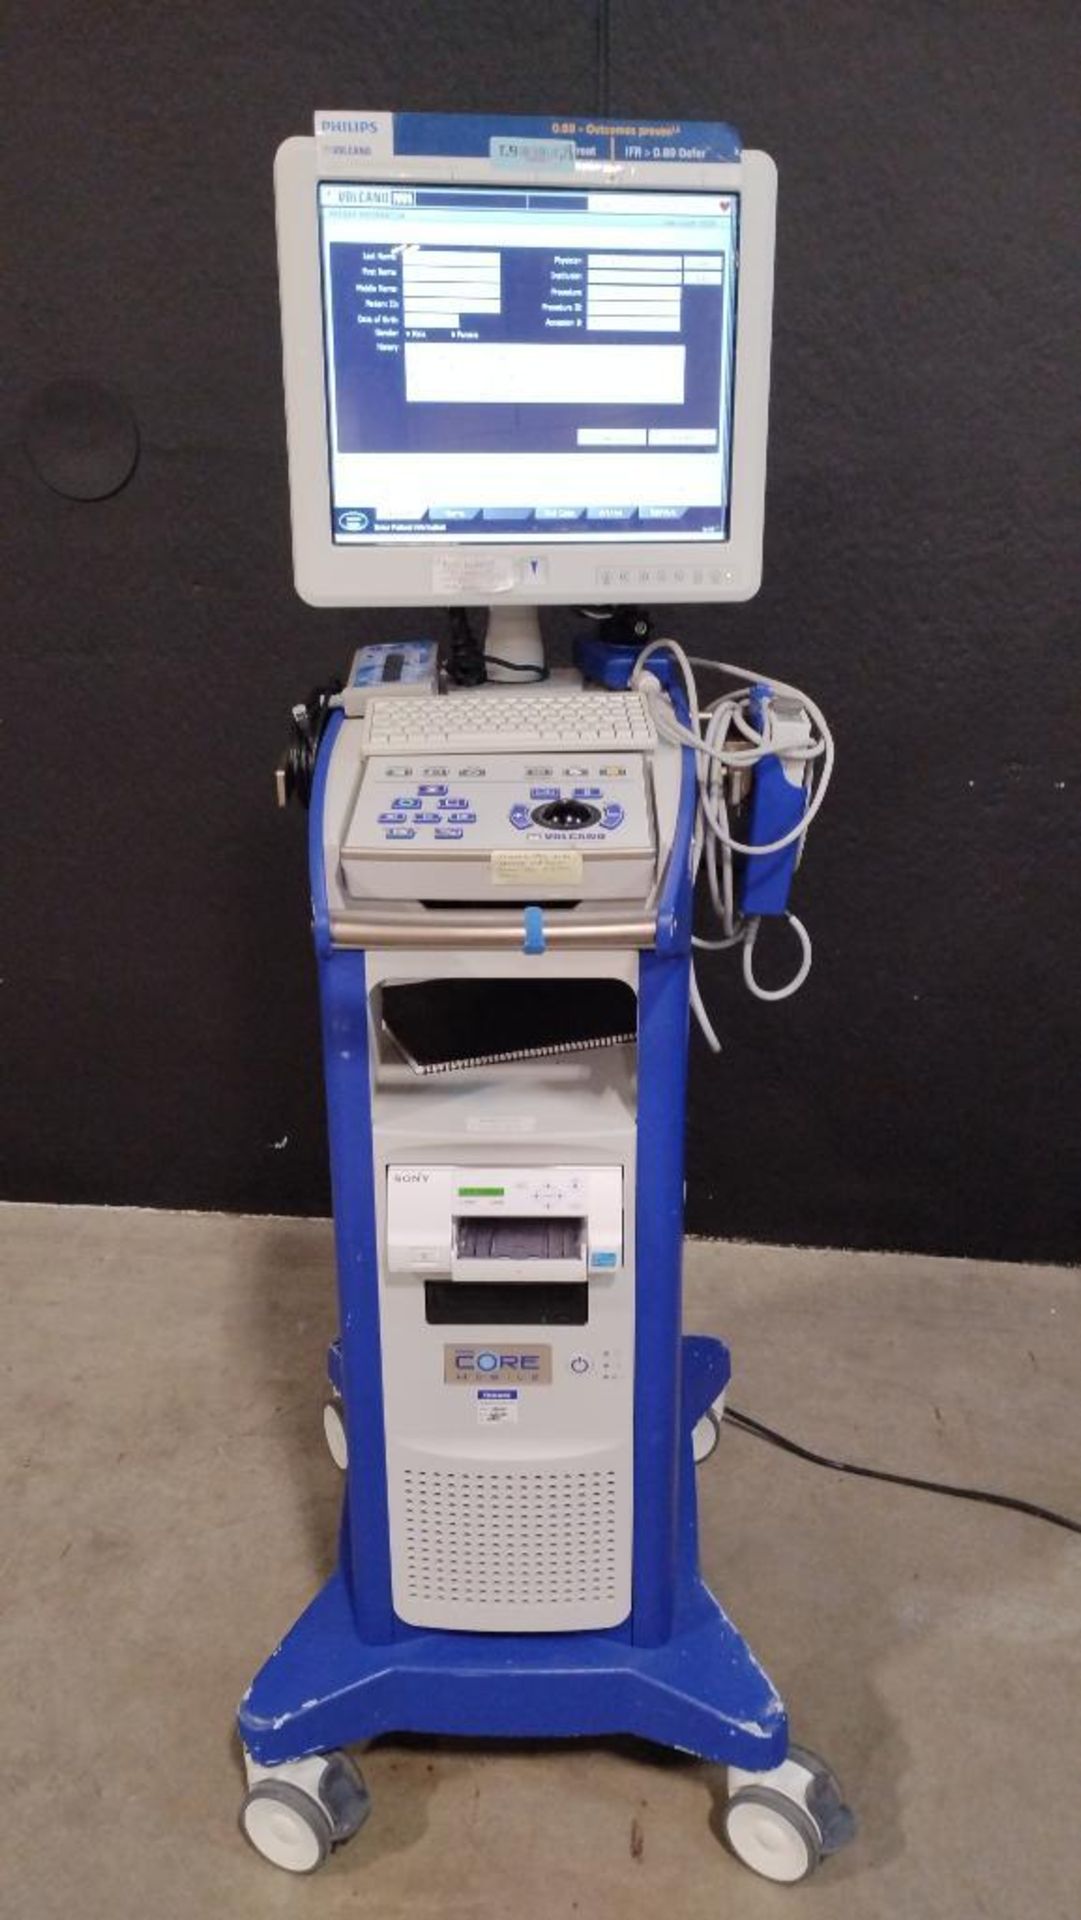 VOLCANO CORE MOBILE PRECISION GUIDED THERAPY SYSTEM